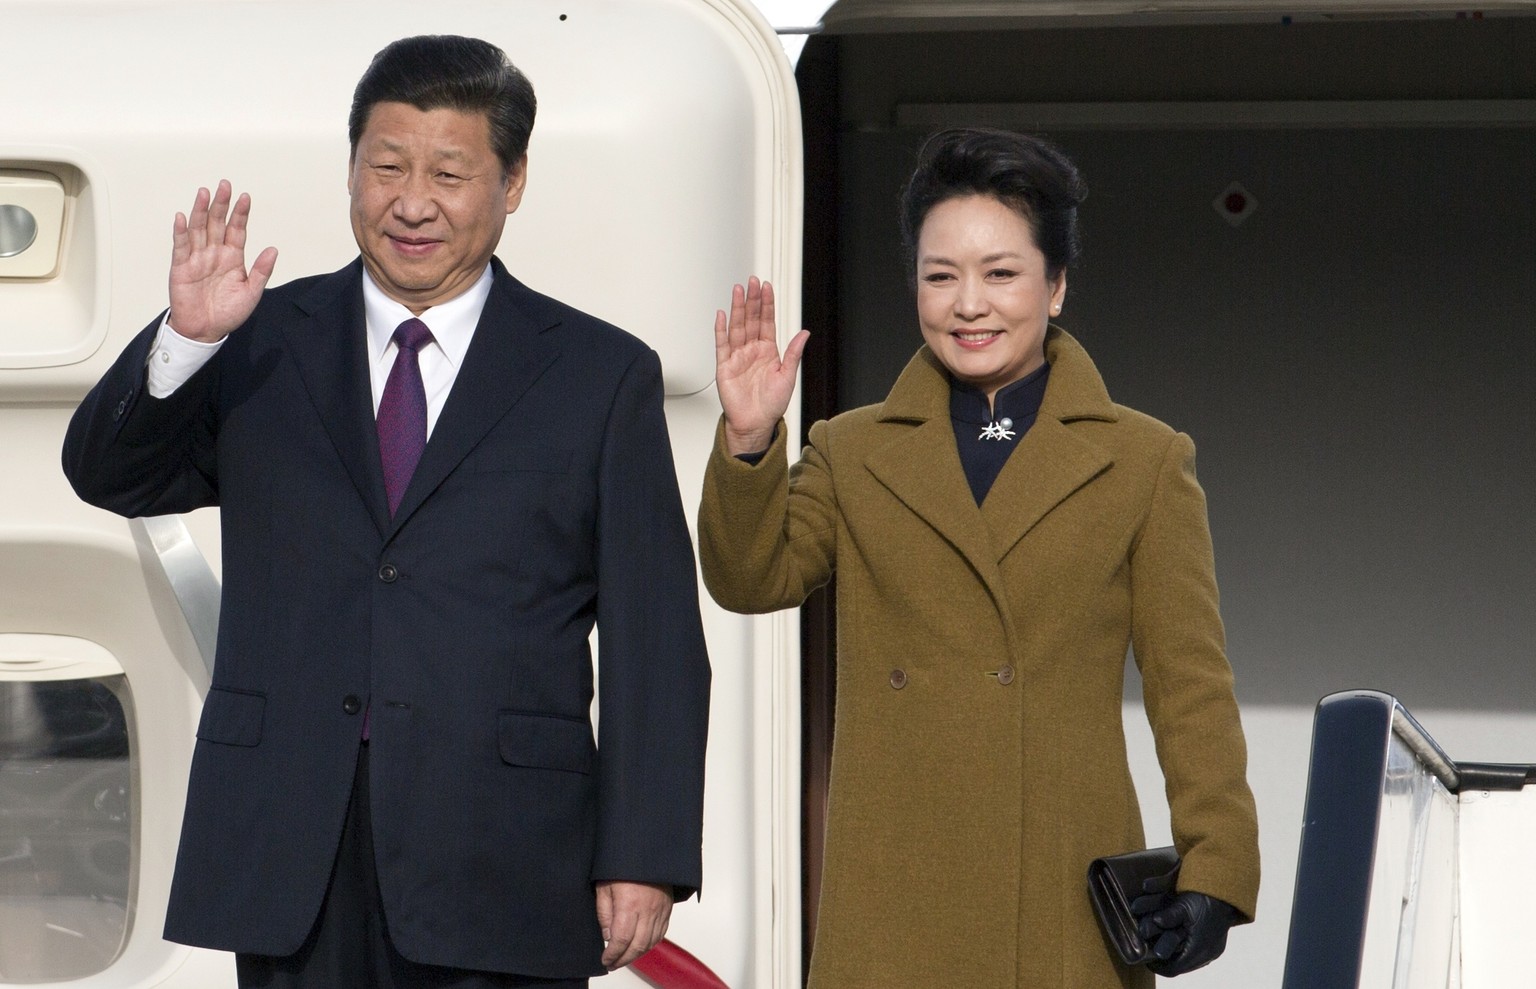 China&#039;s President Xi Jinping, left, and his wife Peng Liyuan wave as they arrive at Abelag airport in Brussels on Sunday, March 30, 2014. Xi is on a three-day official visit to Belgium. (AP Photo ...